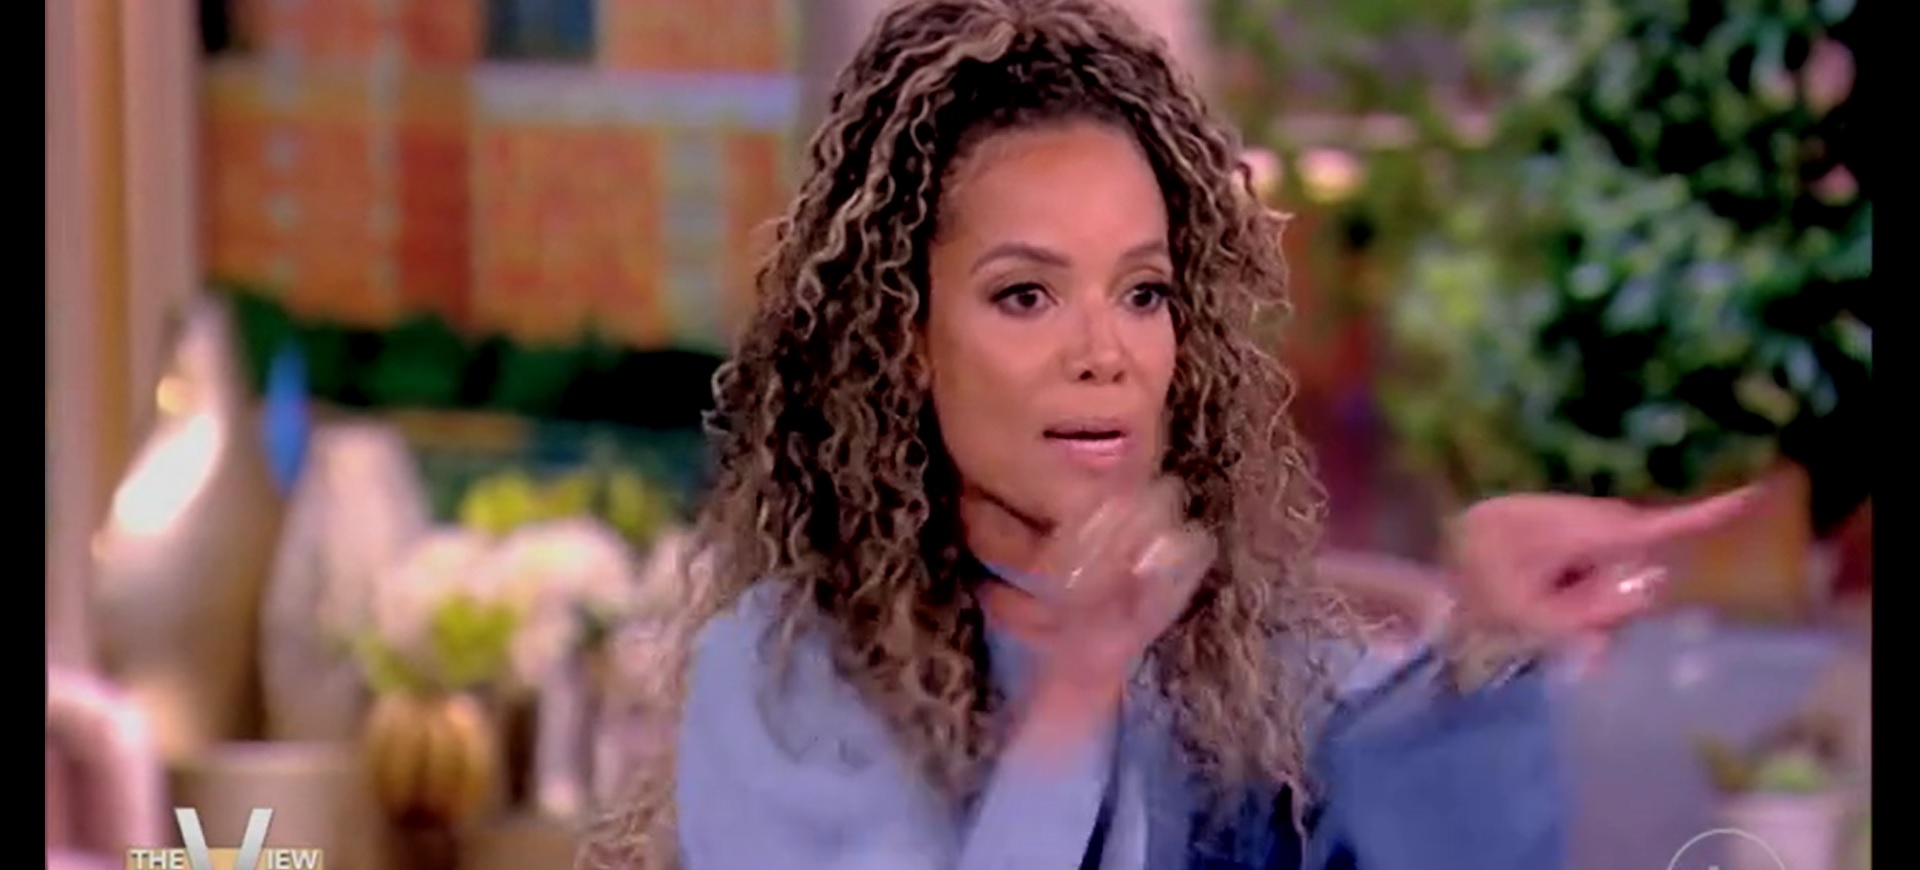 ‘Somehow Miraculously Closed’: ‘The View’ Co-Host Floats Conspiracy ...